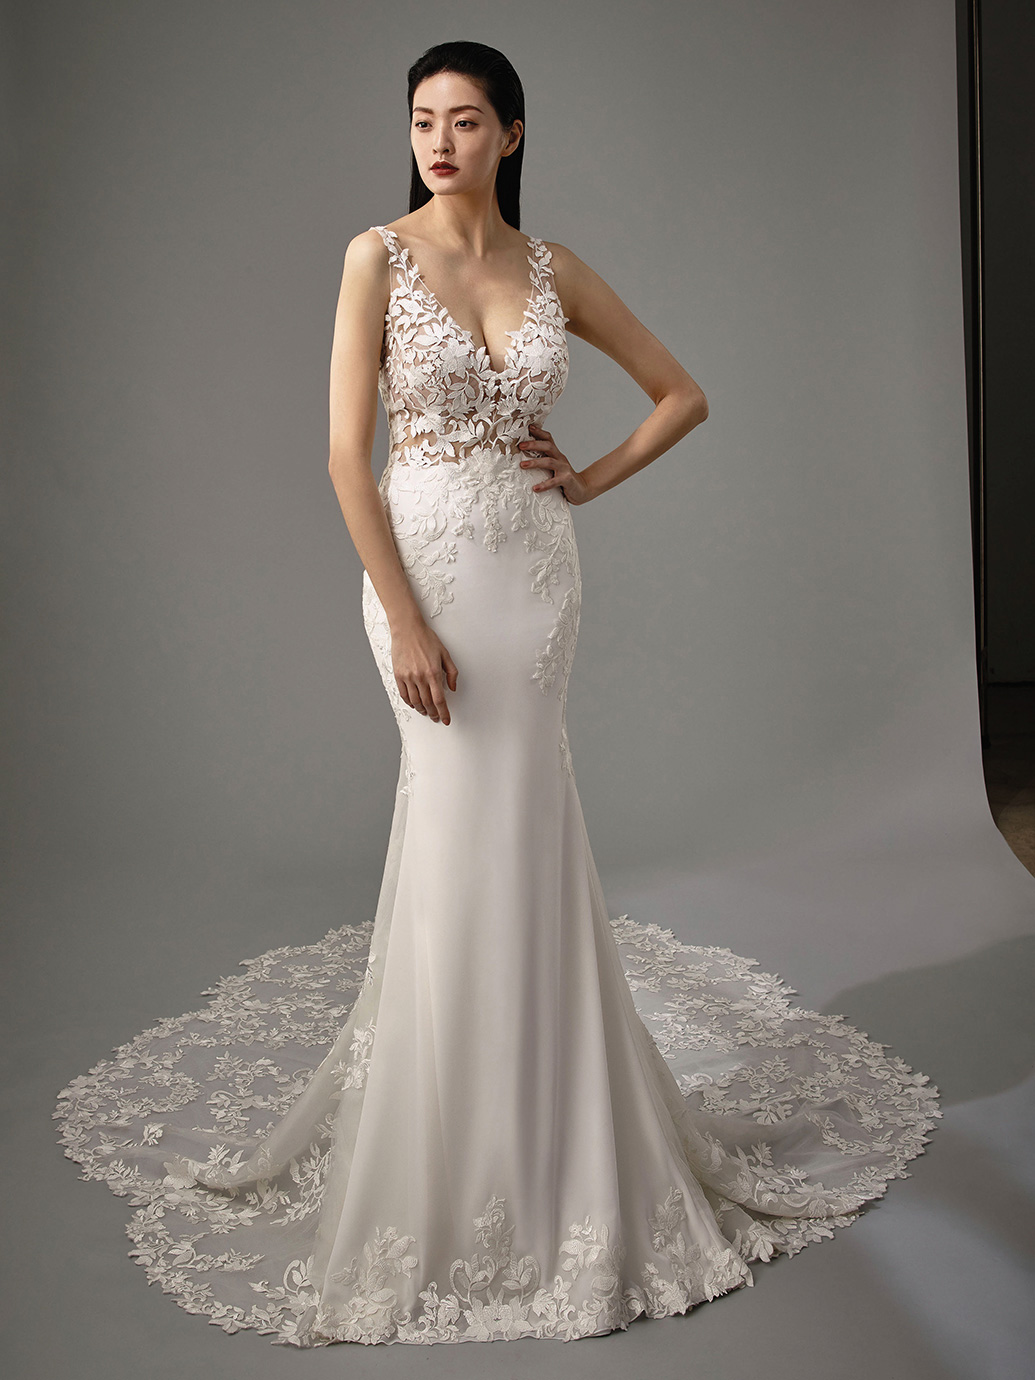 Lace and Crepe Mermaid Bridal Dress Malia by Enzoani at K&B Bridals in baltimore